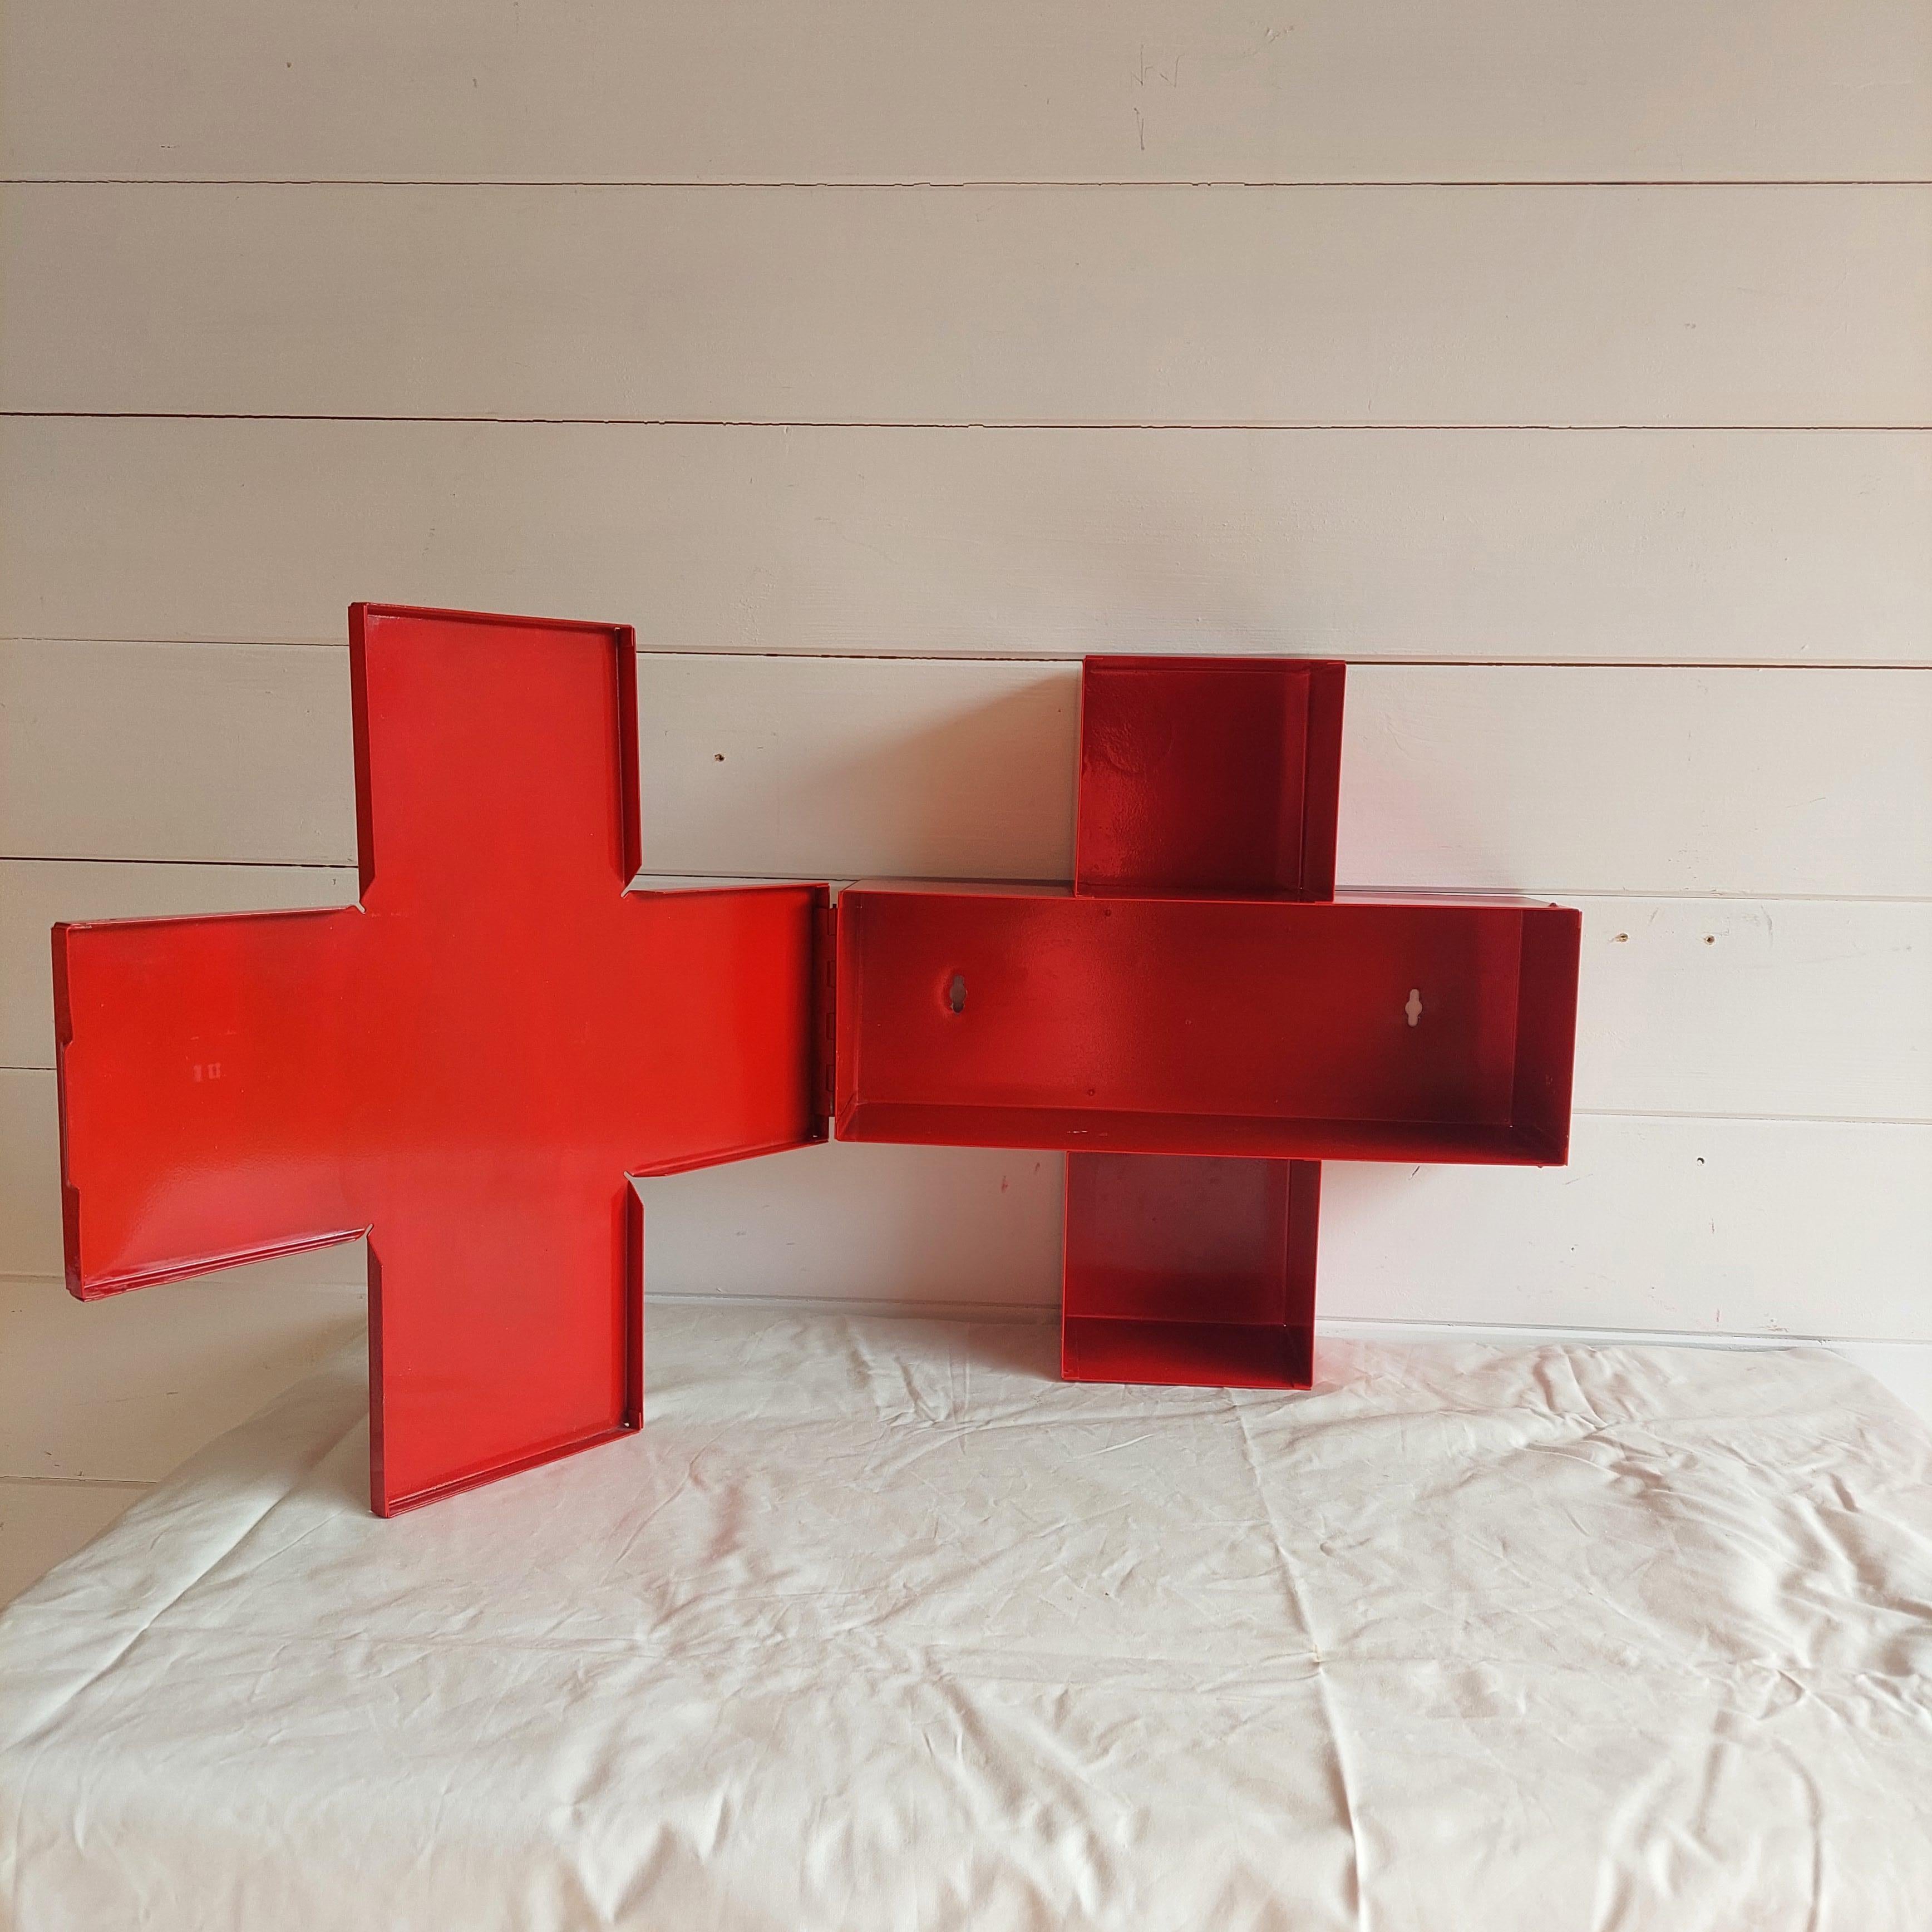 Late 20th Century Red Metal Cross Wall Cabinet 1st Aid Medicine Box, Thomas Eriksson Style 1990s For Sale